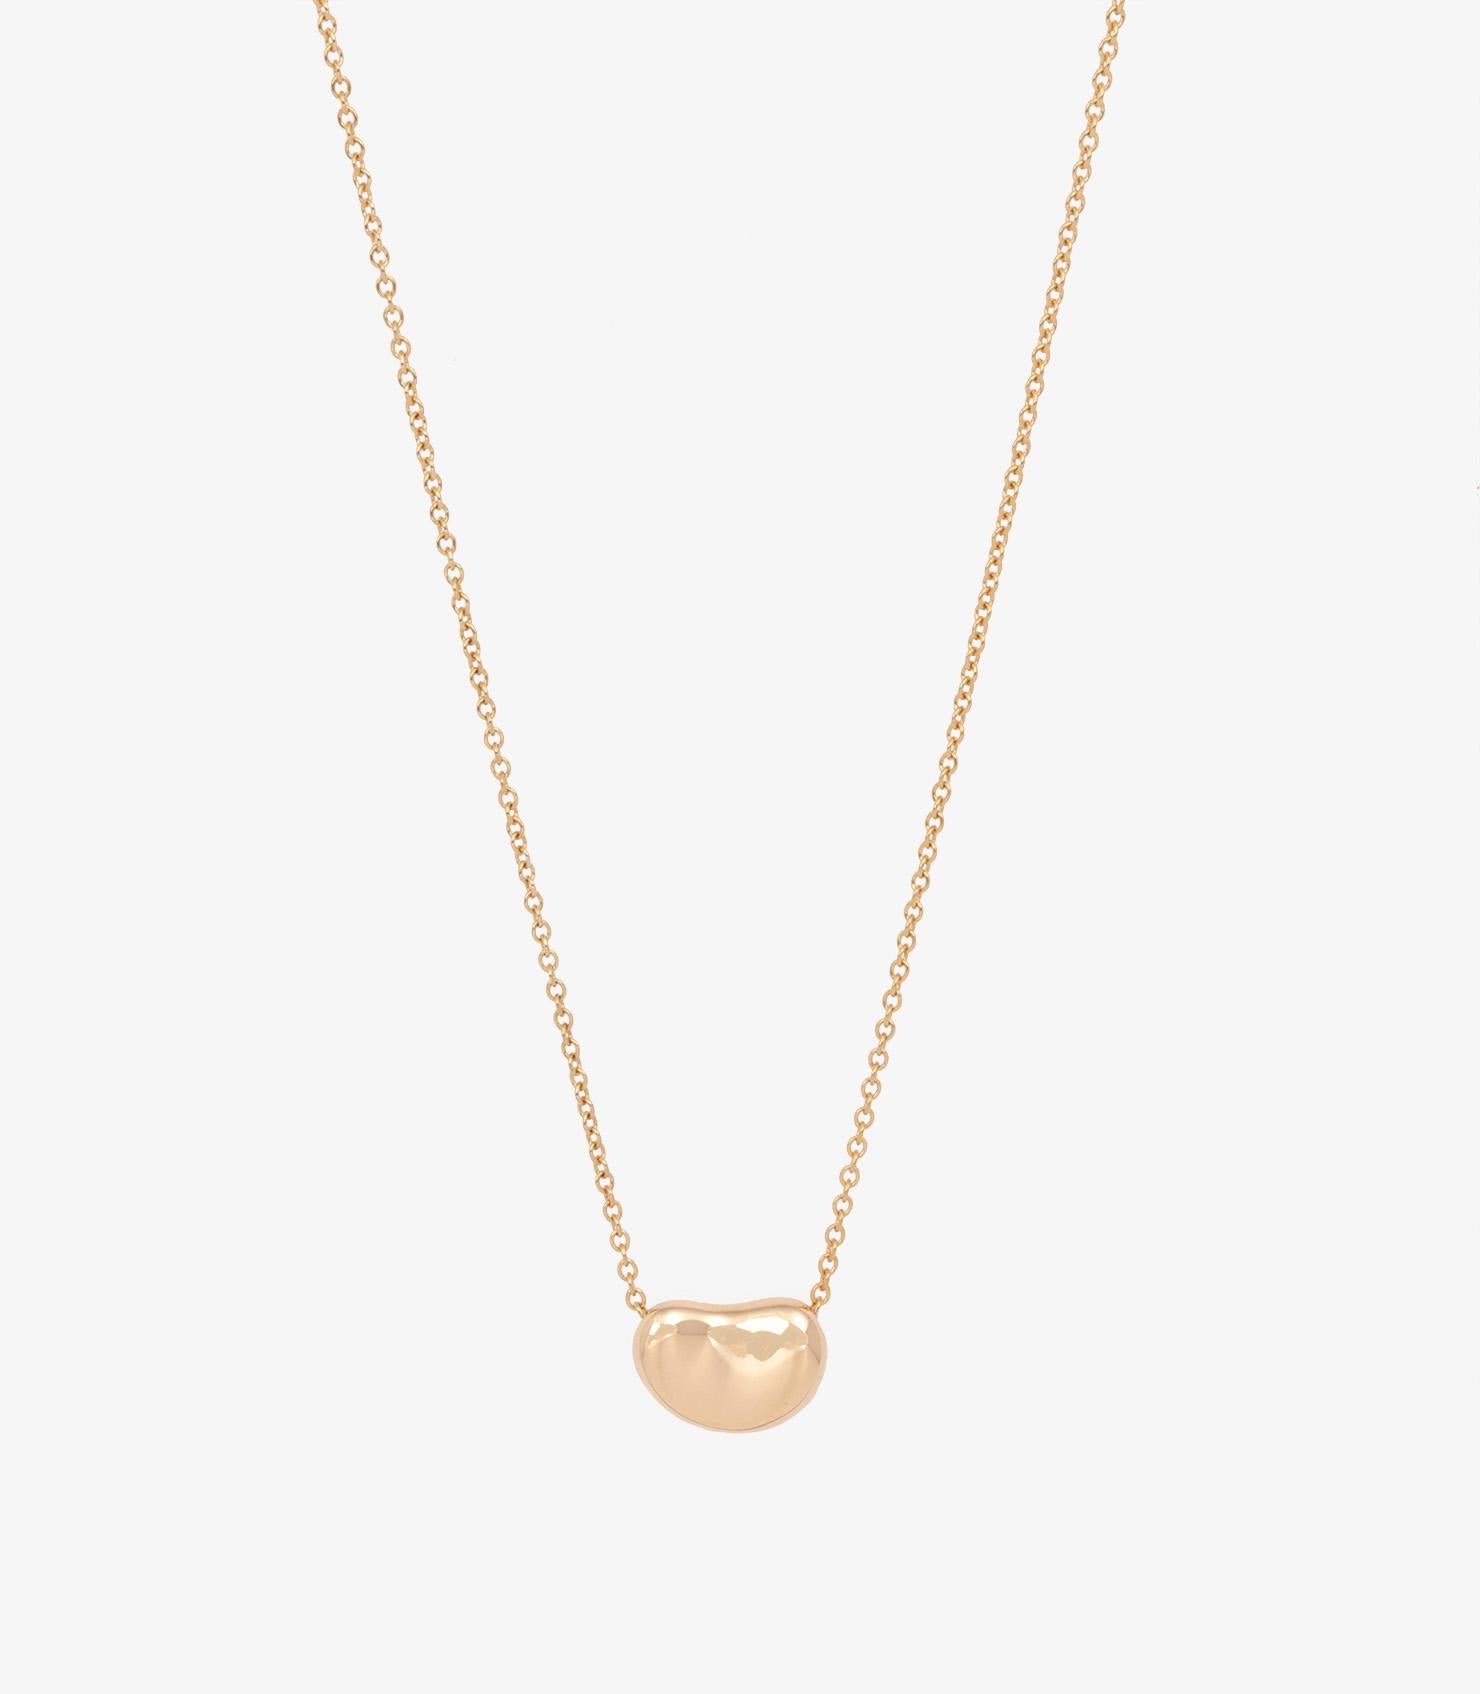 Tiffany & Co. 18ct Yellow Gold Elsa Peretti 11mm Bean Design Pendant In Excellent Condition For Sale In Bishop's Stortford, Hertfordshire